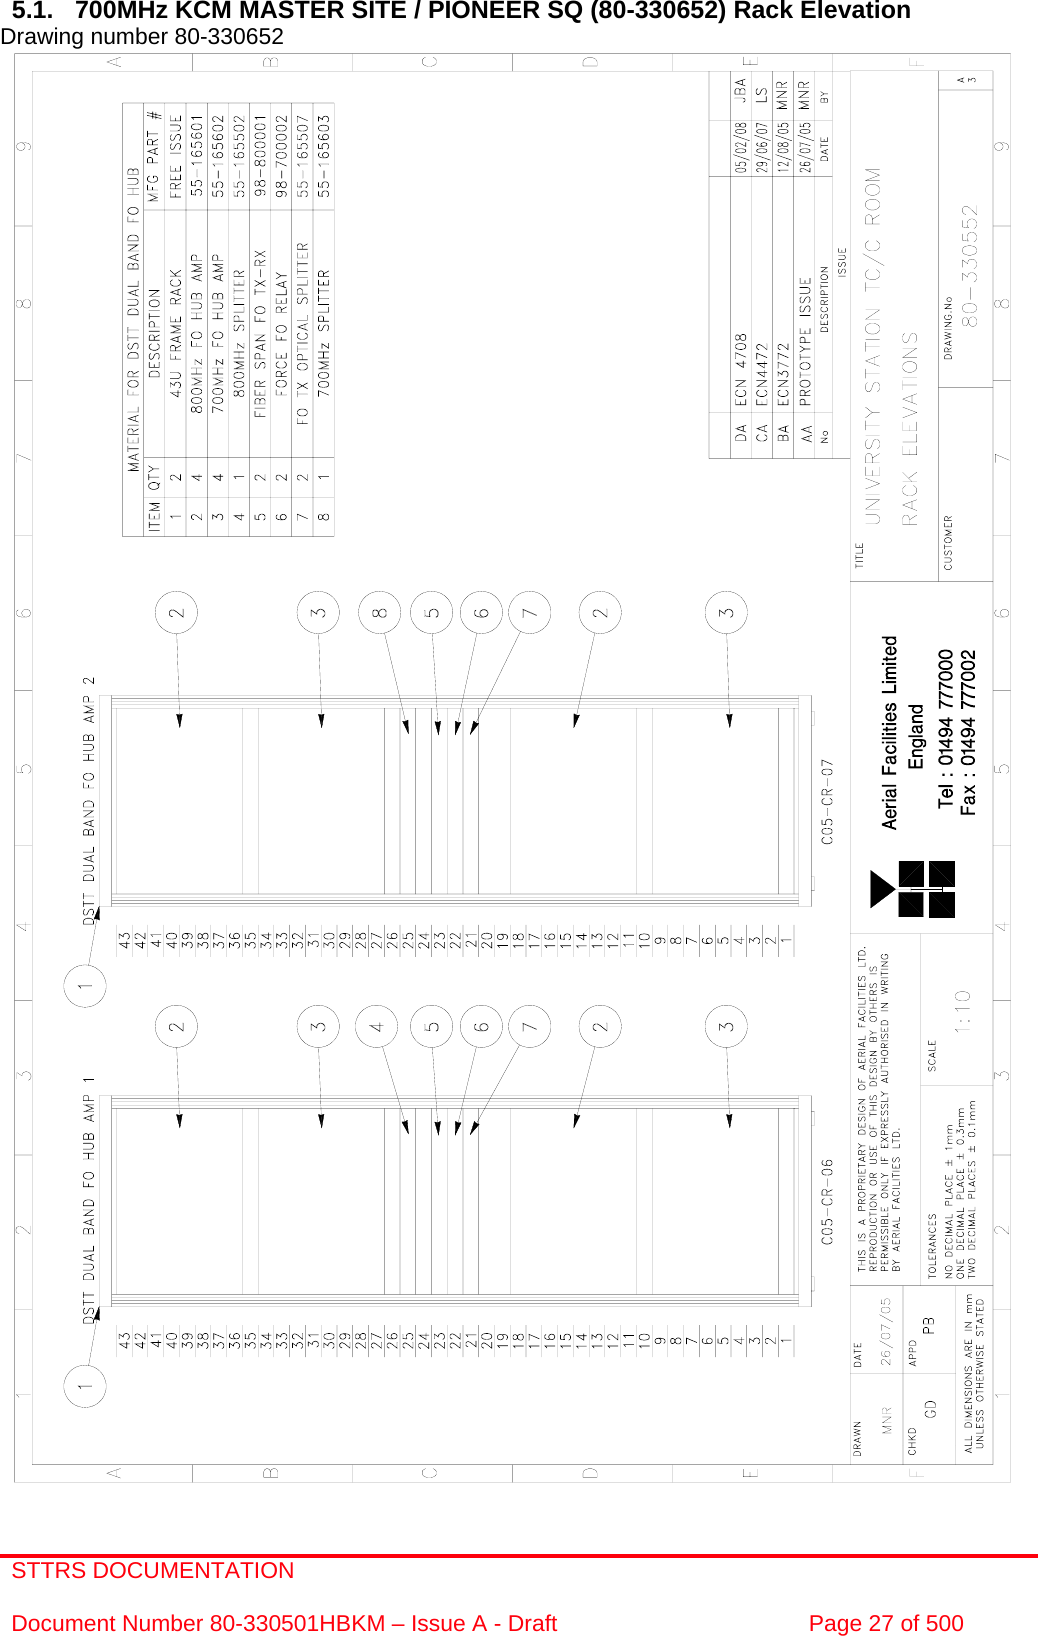 STTRS DOCUMENTATION  Document Number 80-330501HBKM – Issue A - Draft  Page 27 of 500   5.1.  700MHz KCM MASTER SITE / PIONEER SQ (80-330652) Rack Elevation  Drawing number 80-330652                                                        